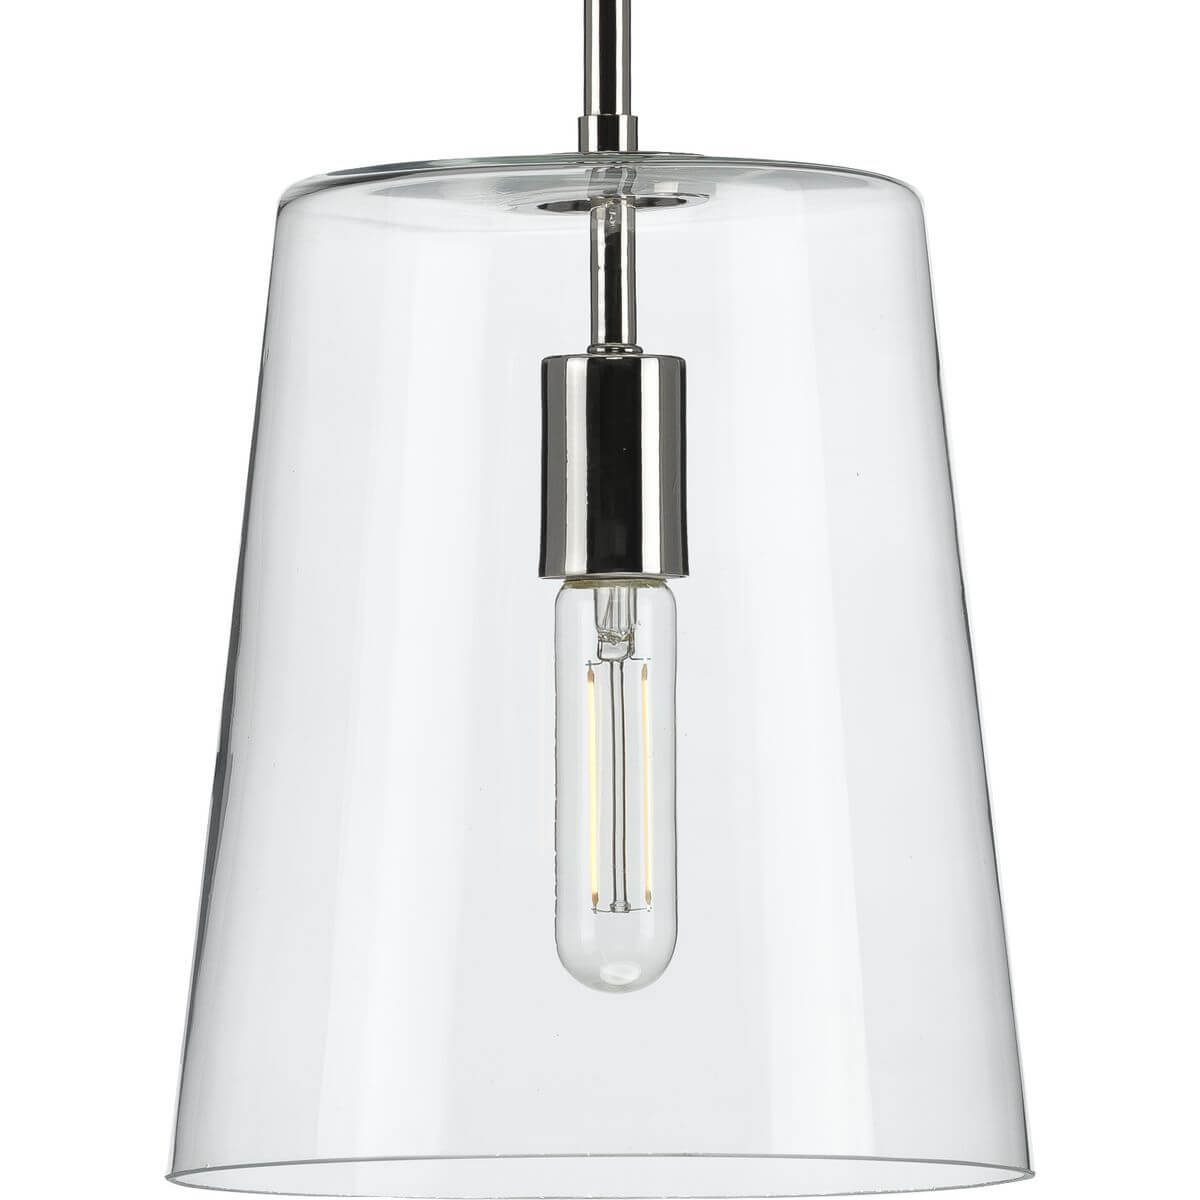 Progress Lighting Clarion 1 Light 9 inch Pendant in Polished Nickel with Clear Glass P500241-104